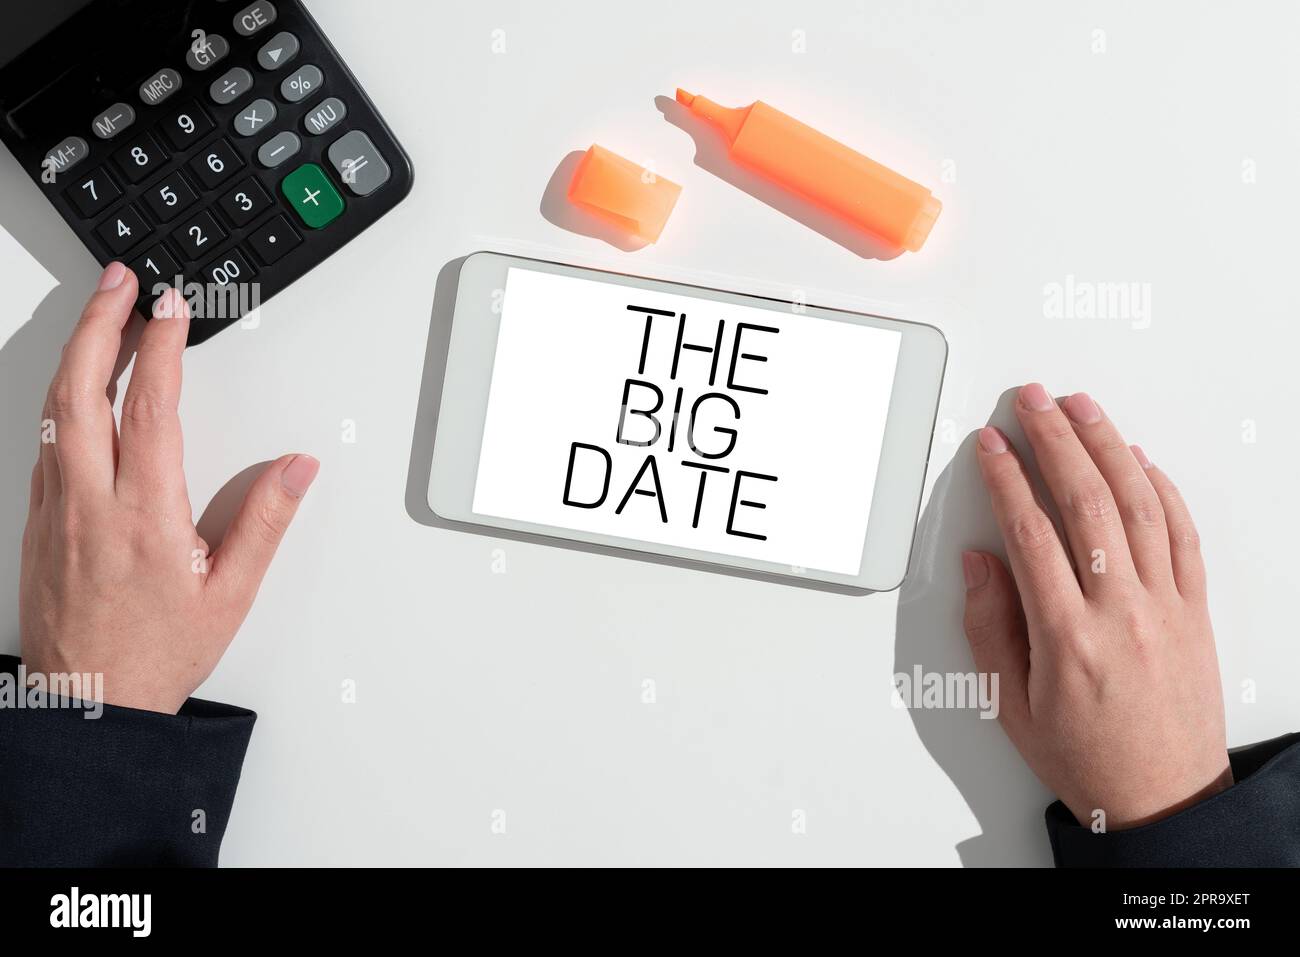 Conceptual caption The Big Date. Business overview Important day for a couple relationship wedding anniversary Woman Presenting New Ideas On Tablet On Desk With Marker And Calculator. Stock Photo